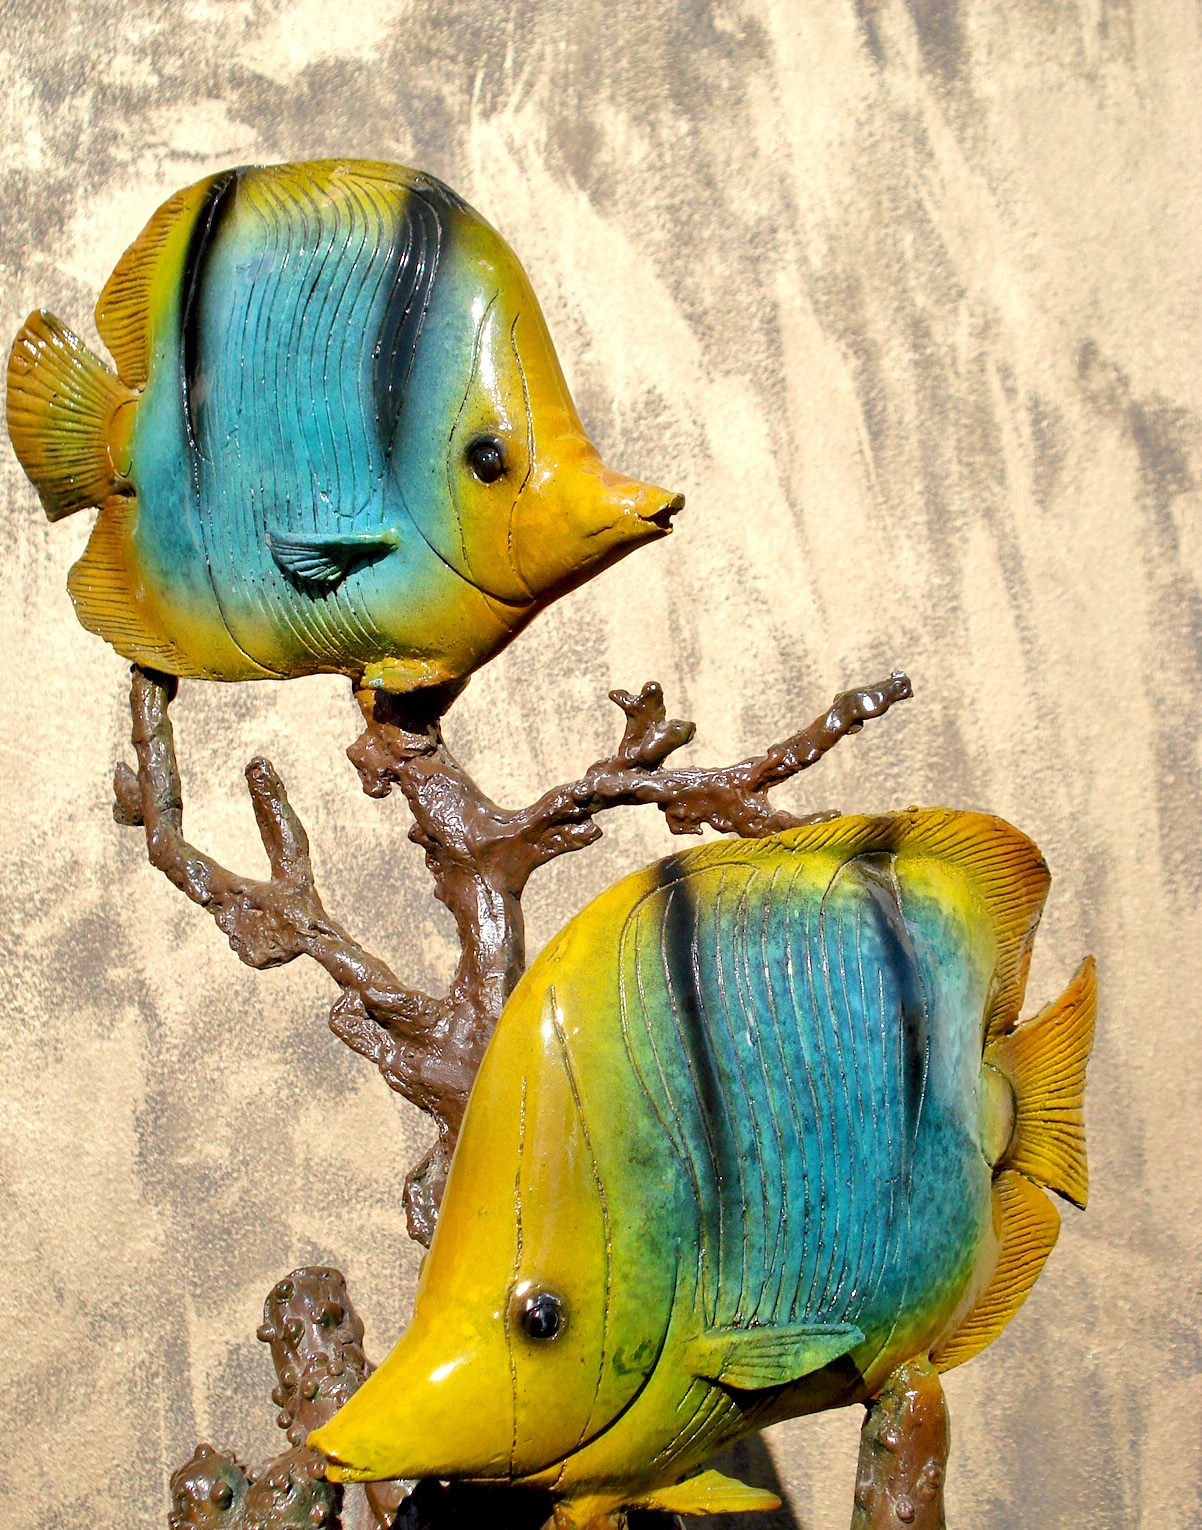 bronze statue of butterfly fish